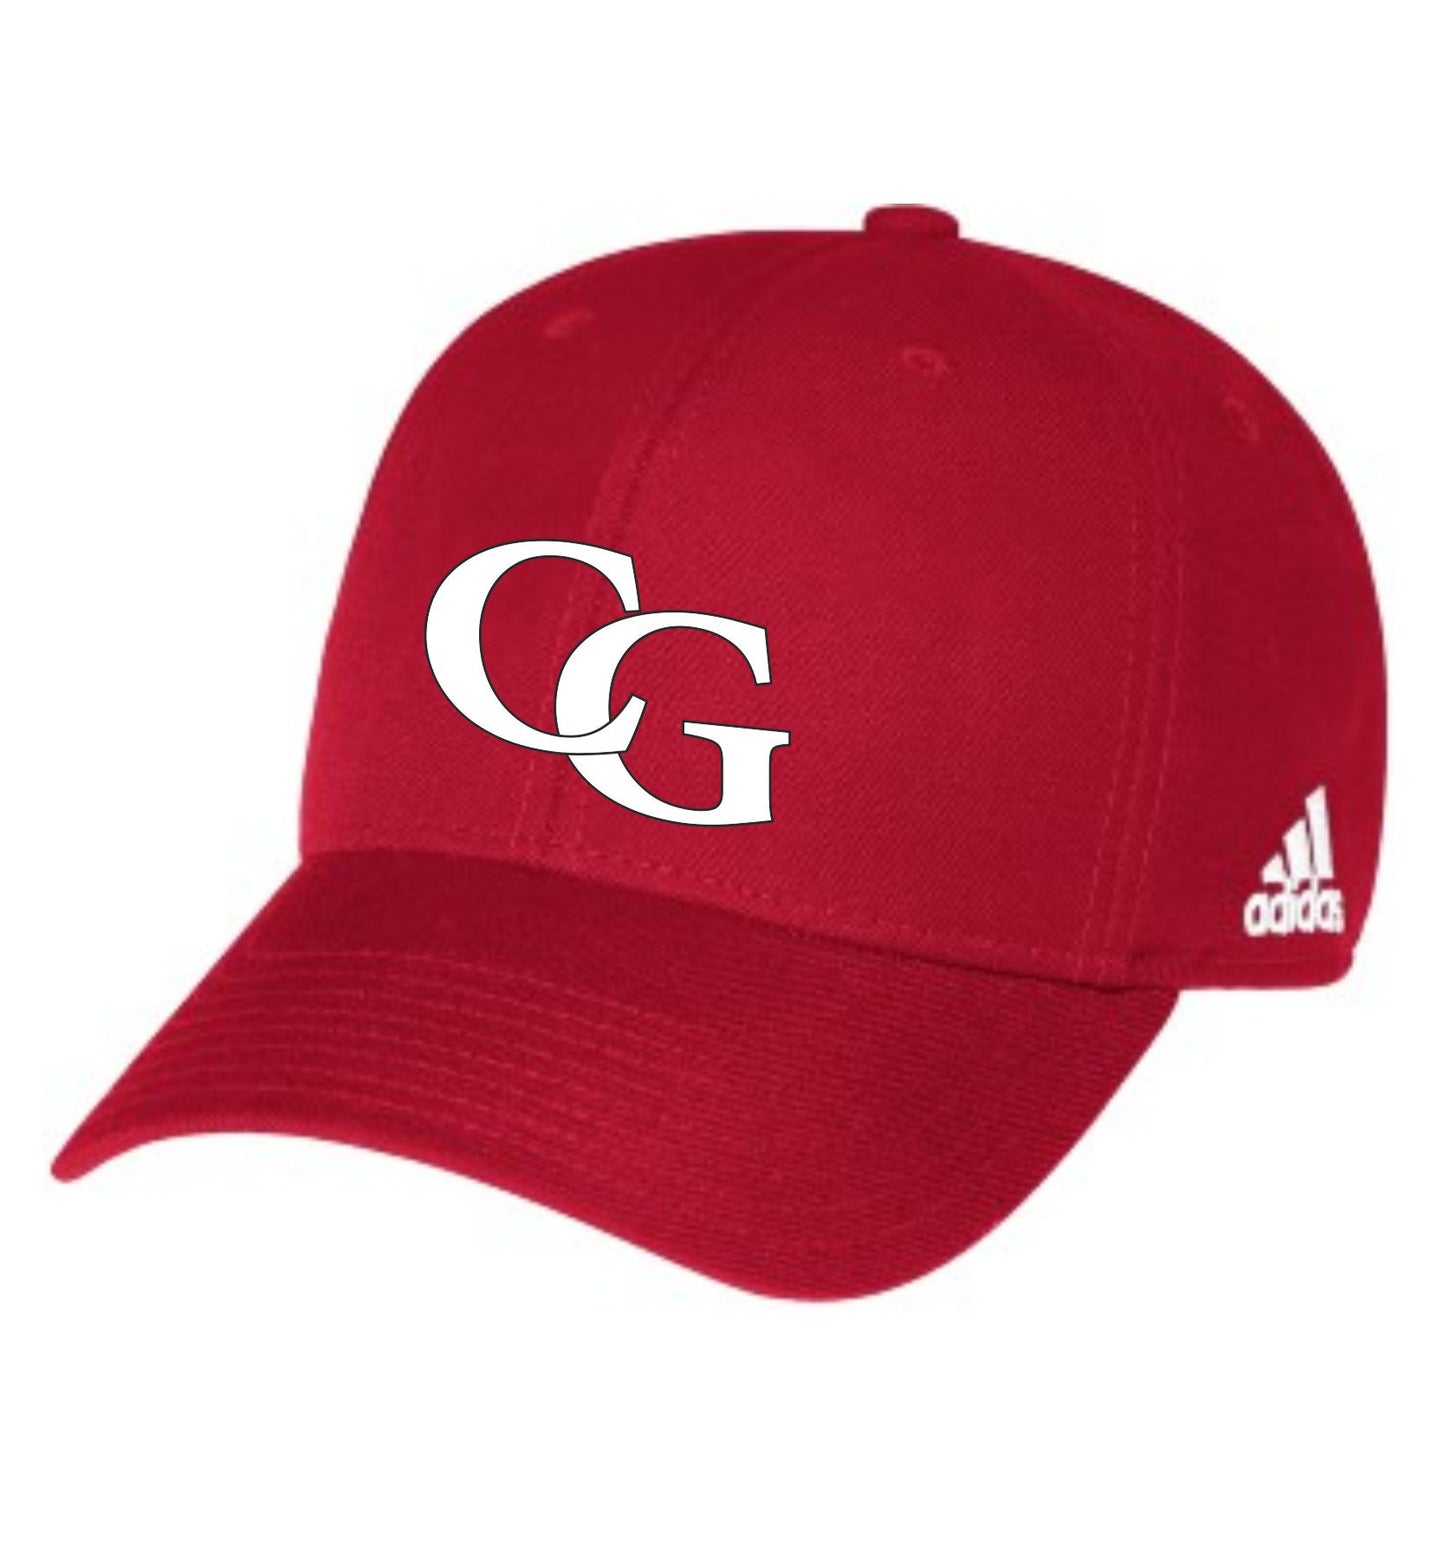 Adidas Slouch Red Hat